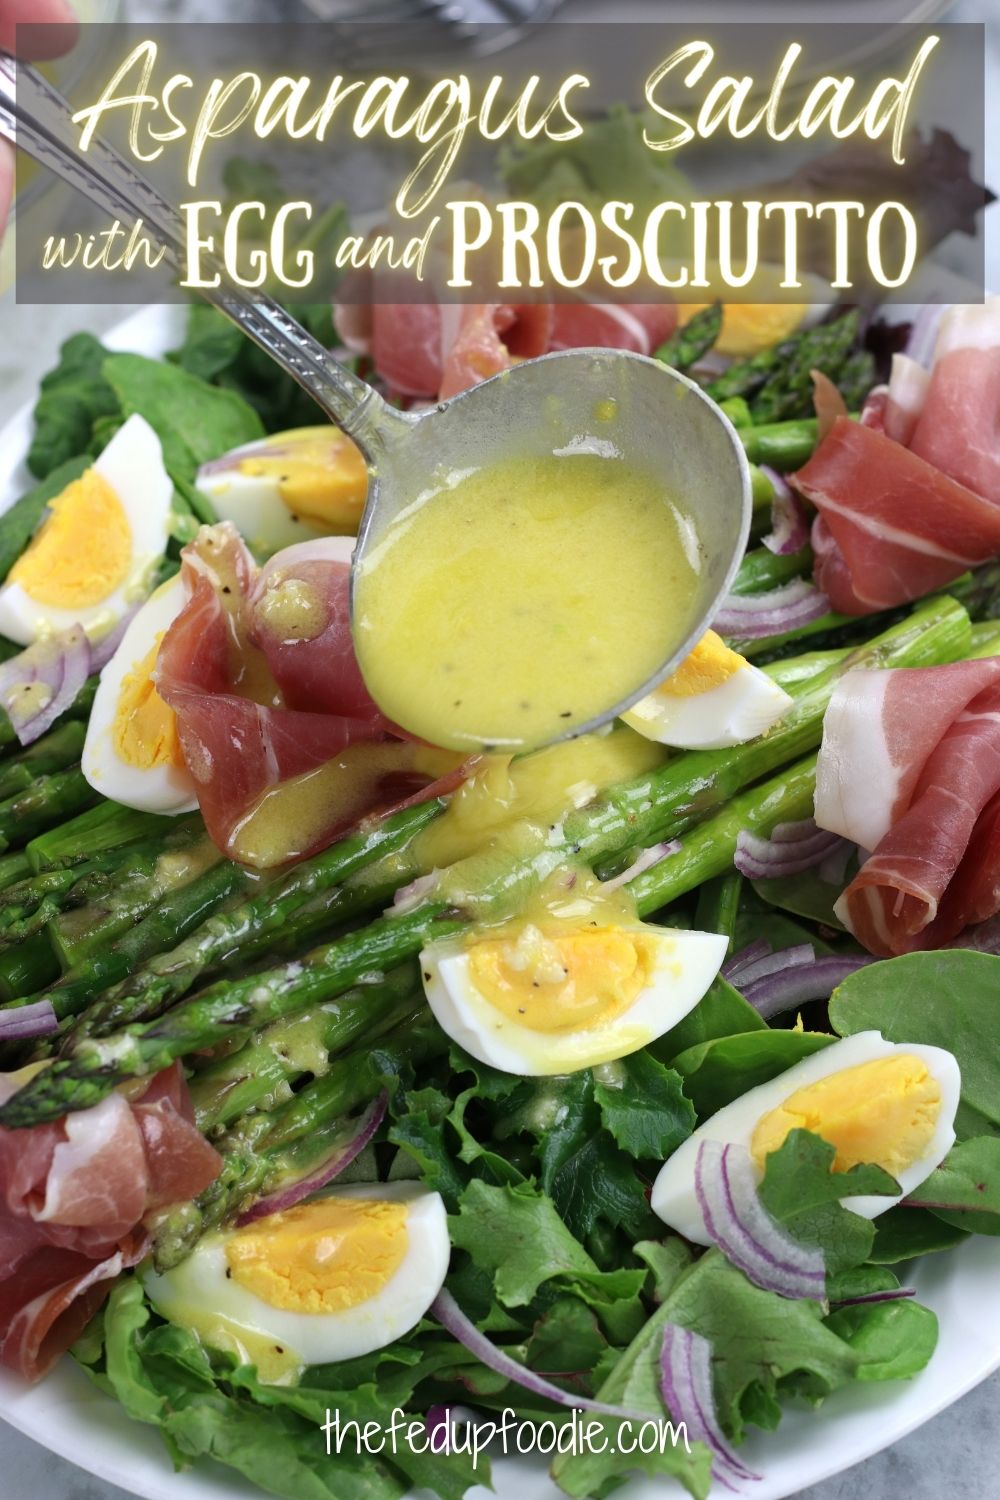 Asparagus Salad with Egg and Prosciutto is special enough for spring and summer holidays and parties or as a simple meal for warmer weather. With make-ahead ingredients, this salad has a quick 5 minute assembly. 
#AsparagusRecipes #AsparagusSalad #AsparagusSaladRecipes #AsparagusSaladCold #AsparagusSaladCold #AsparagusSaladWithLemonVinaigrette #AsparagusSaladRecipesHealthy #AsparagusSaladRecipesSummer #GourmetSaladRecipes